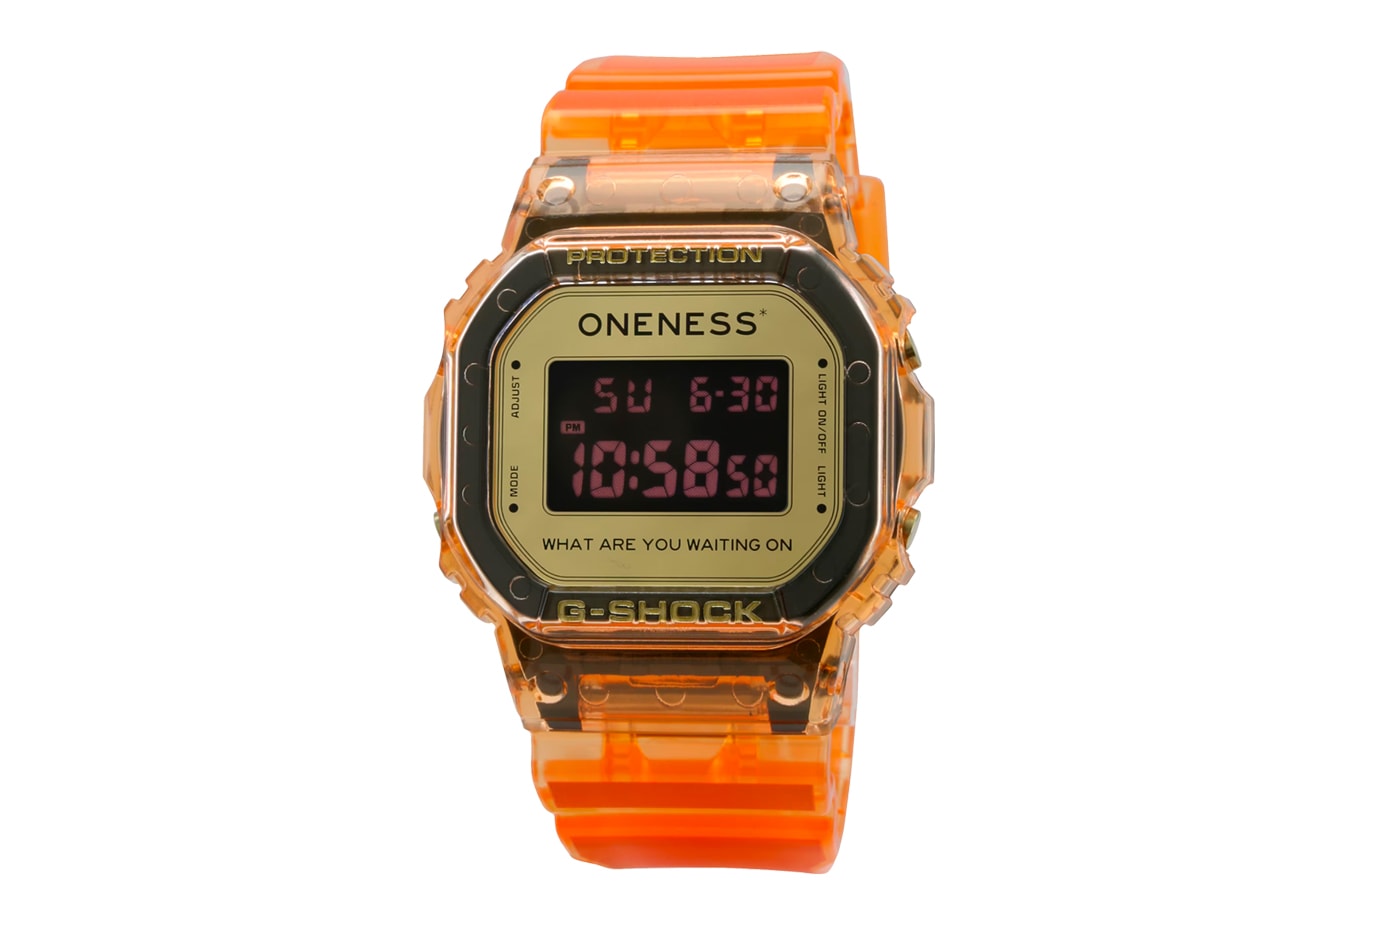 G-SHOCK Oneness DW5600ONS234 Collaboration Release Info